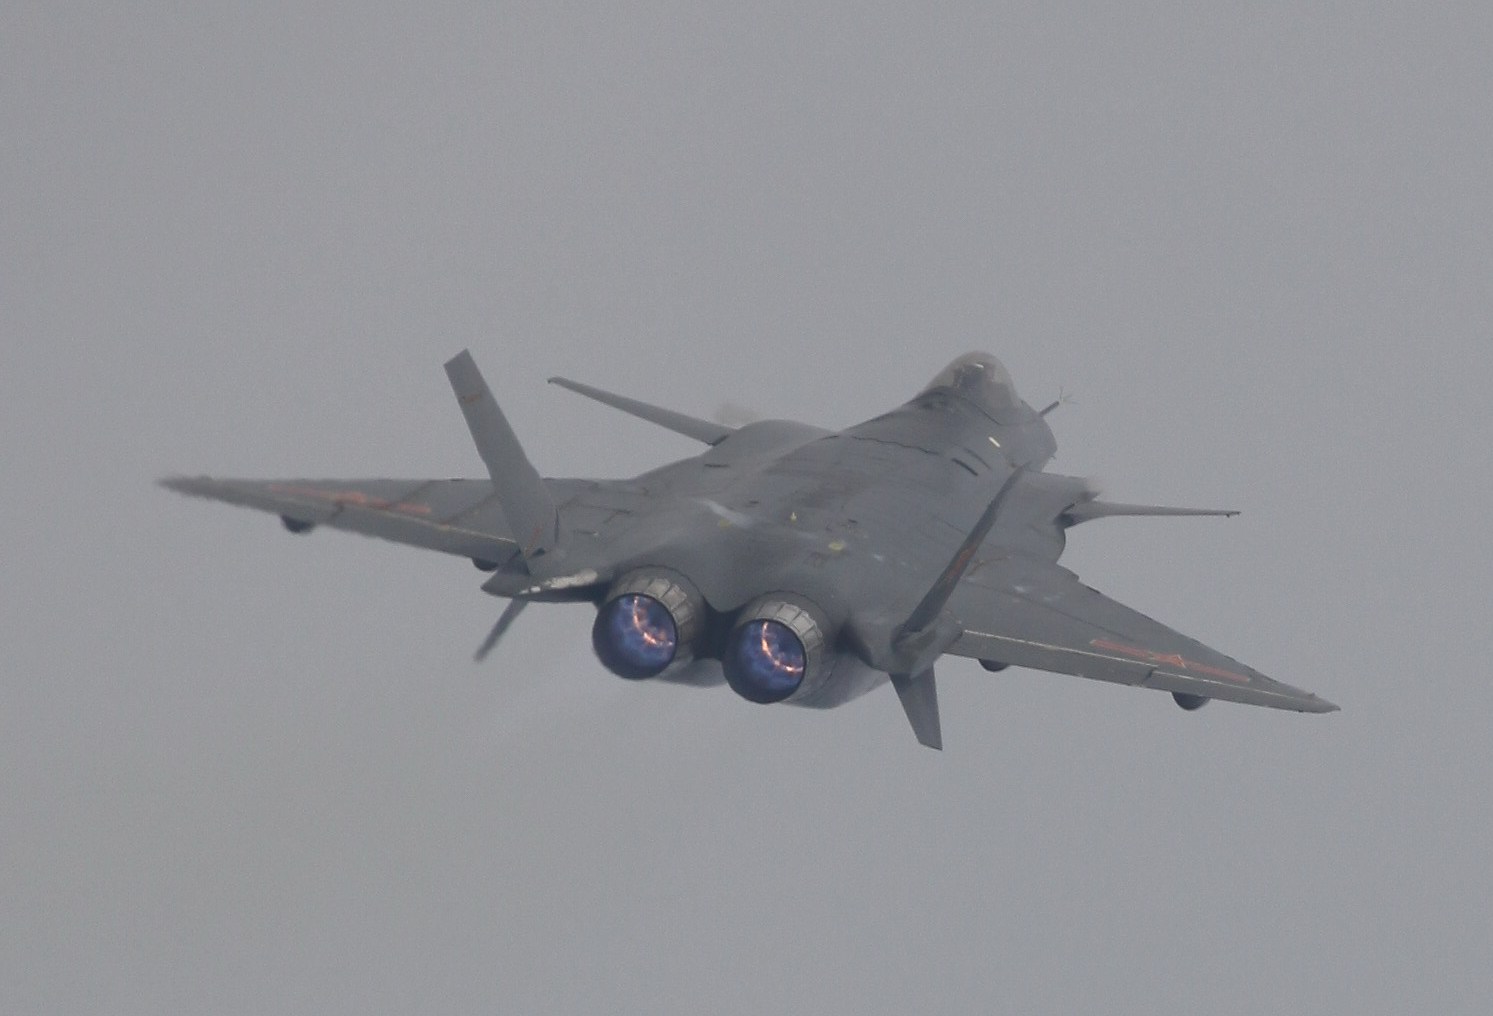 J-20+Mighty+Dragon++Chengdu+J-20+fifth+generation+stealth%252C+twin-engine+fighter+aircraft+prototype+People%2527s+Liberation+Army+Air+Force++OPERATIONAL+weapons+aam+bvr+missile+ls+pgm+gps+plaaf+%25282%2529.jpg